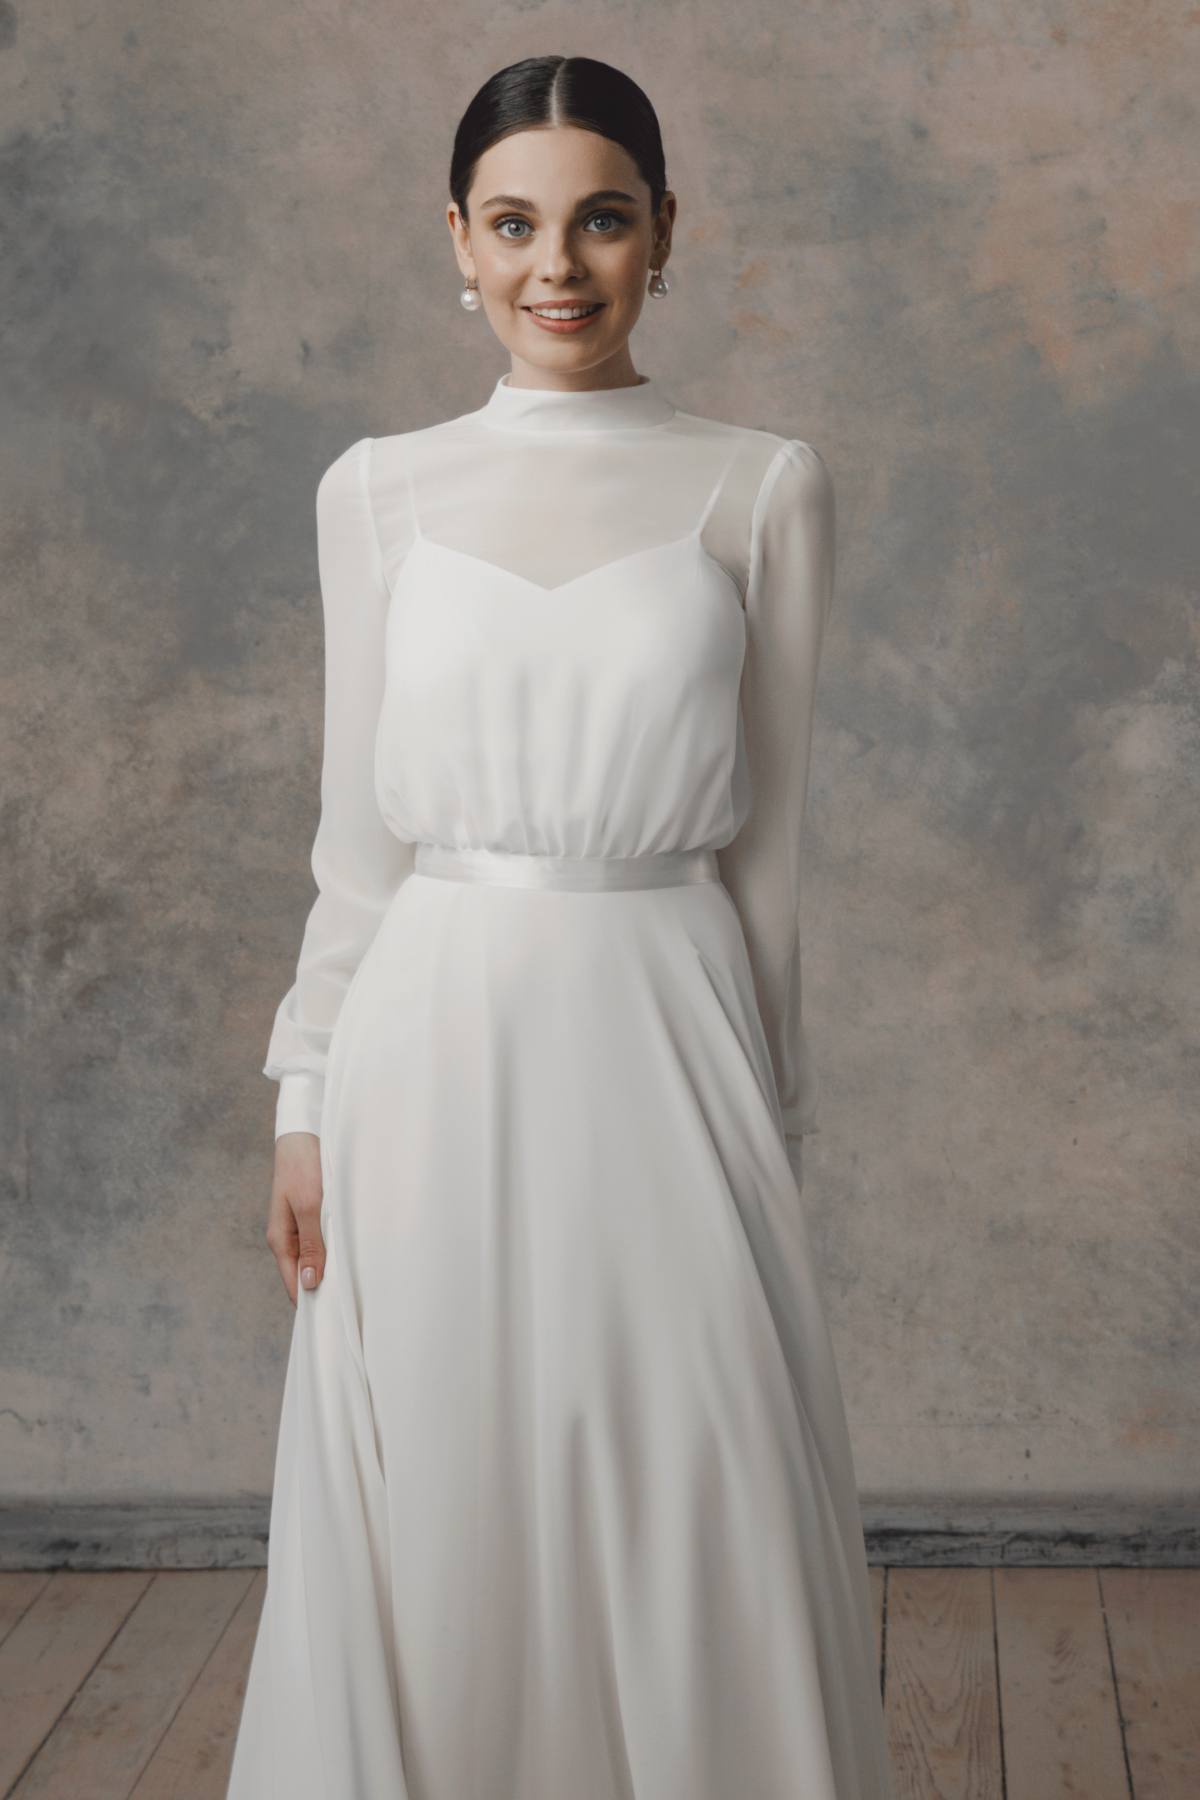 Modest wedding dress with long sleeves.